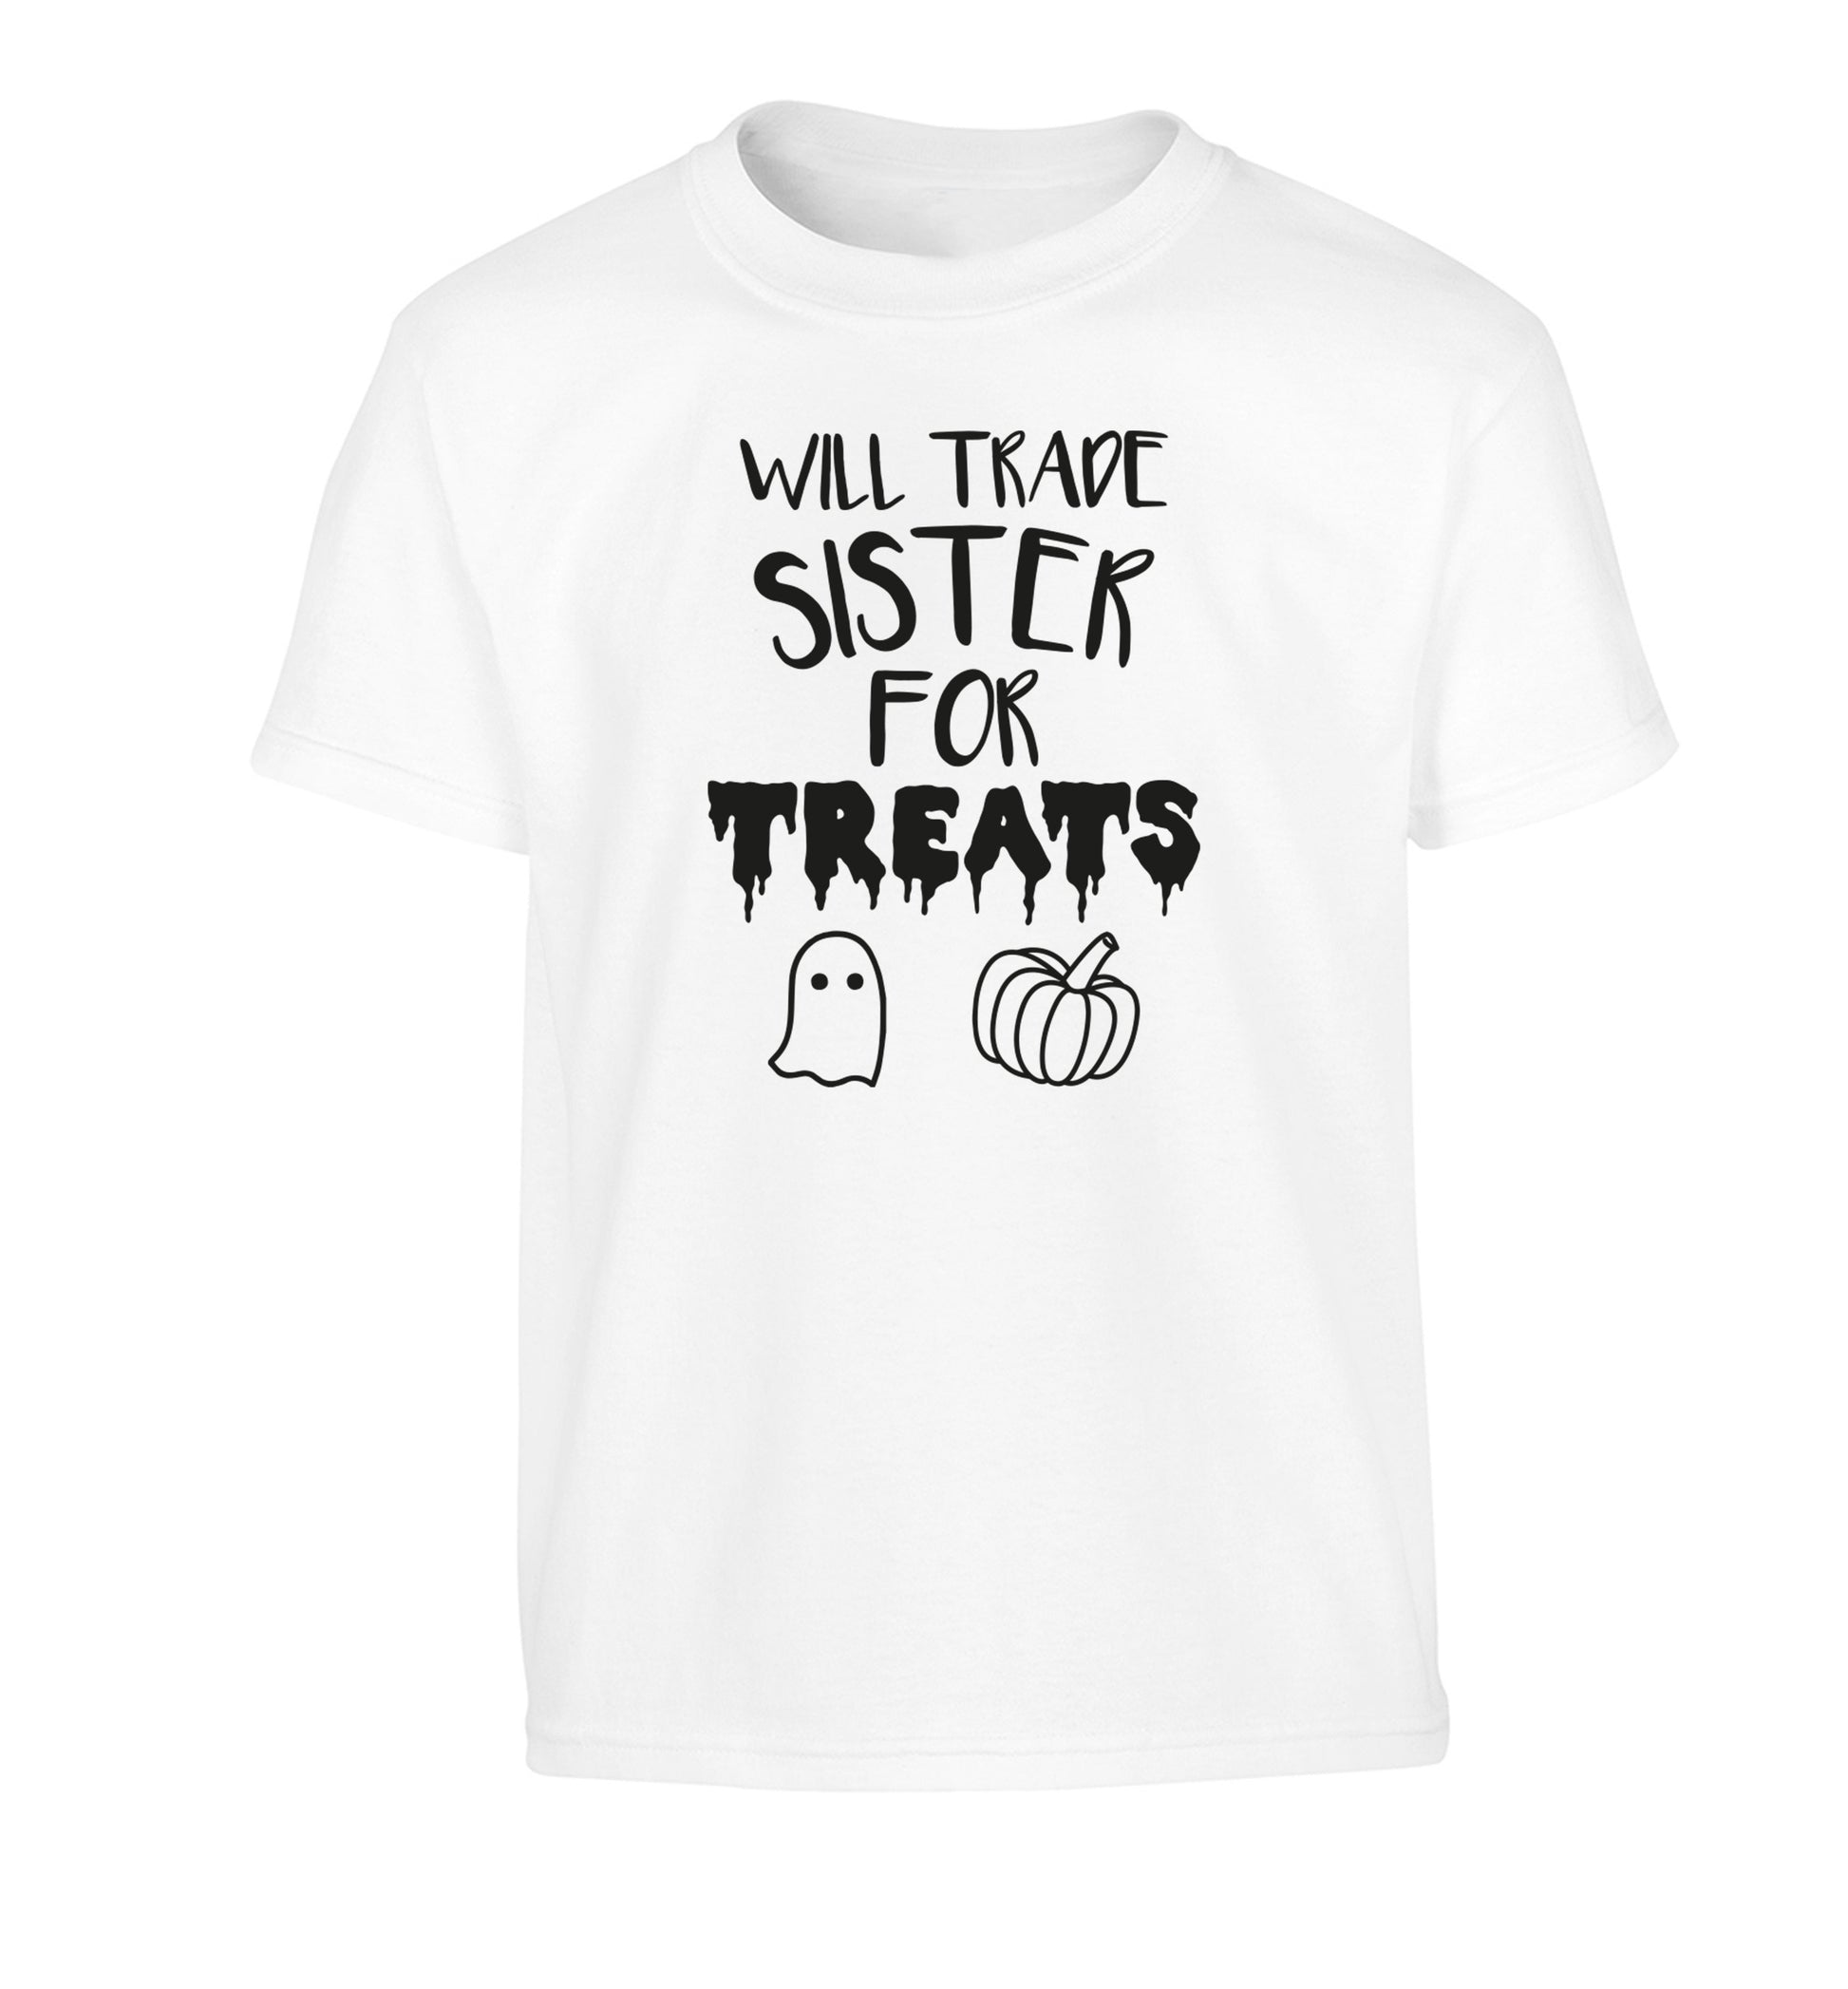 Will trade sister for treats Children's white Tshirt 12-14 Years